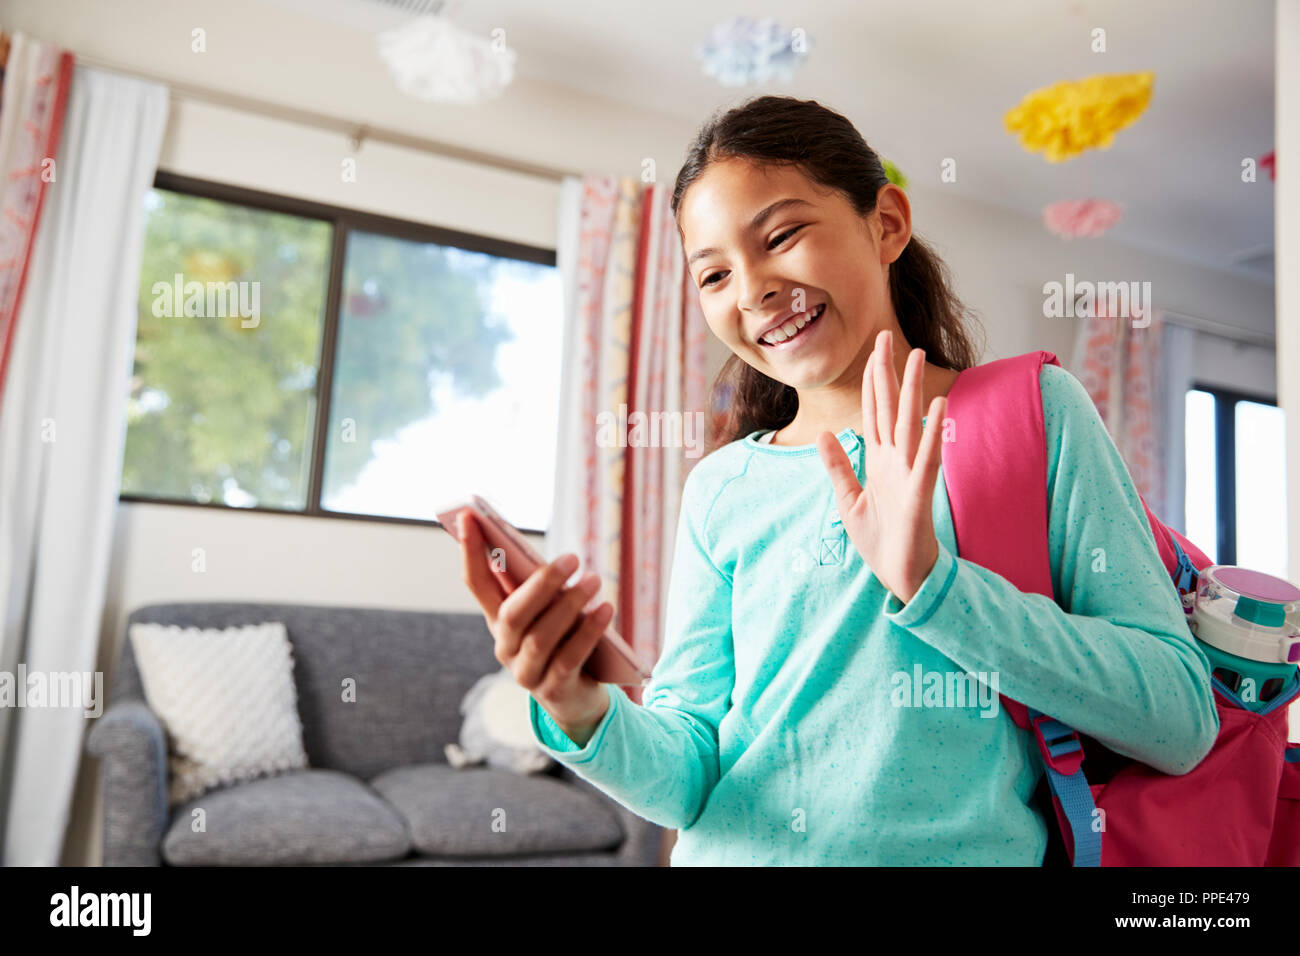 Young Girl With Backpack In Bedroom Ready To Go To School Making Video Call On Mobile Phone Stock Photo